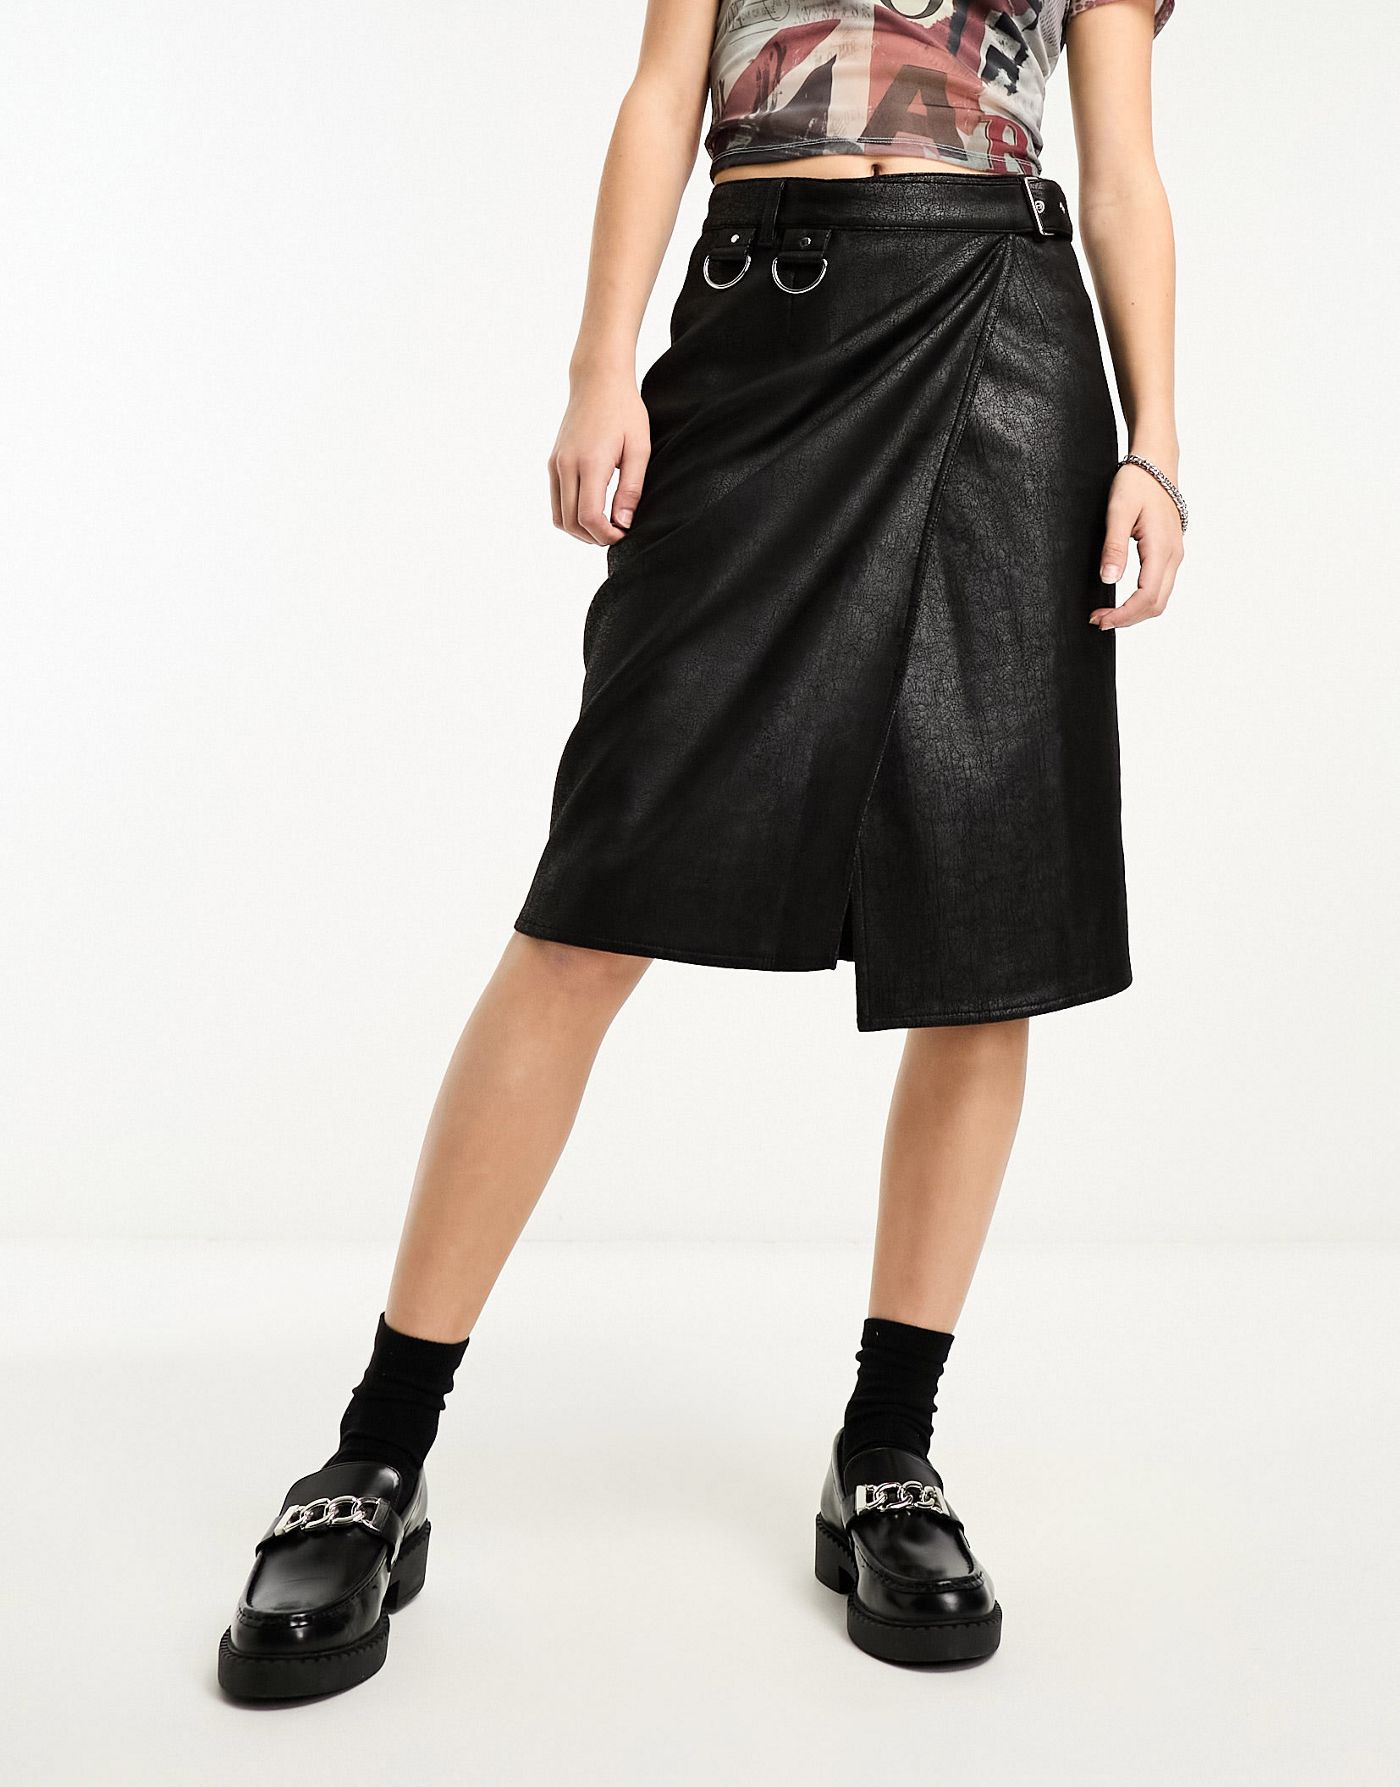 Weekday Oda faux leather midi skirt with belt and hardware details in black 